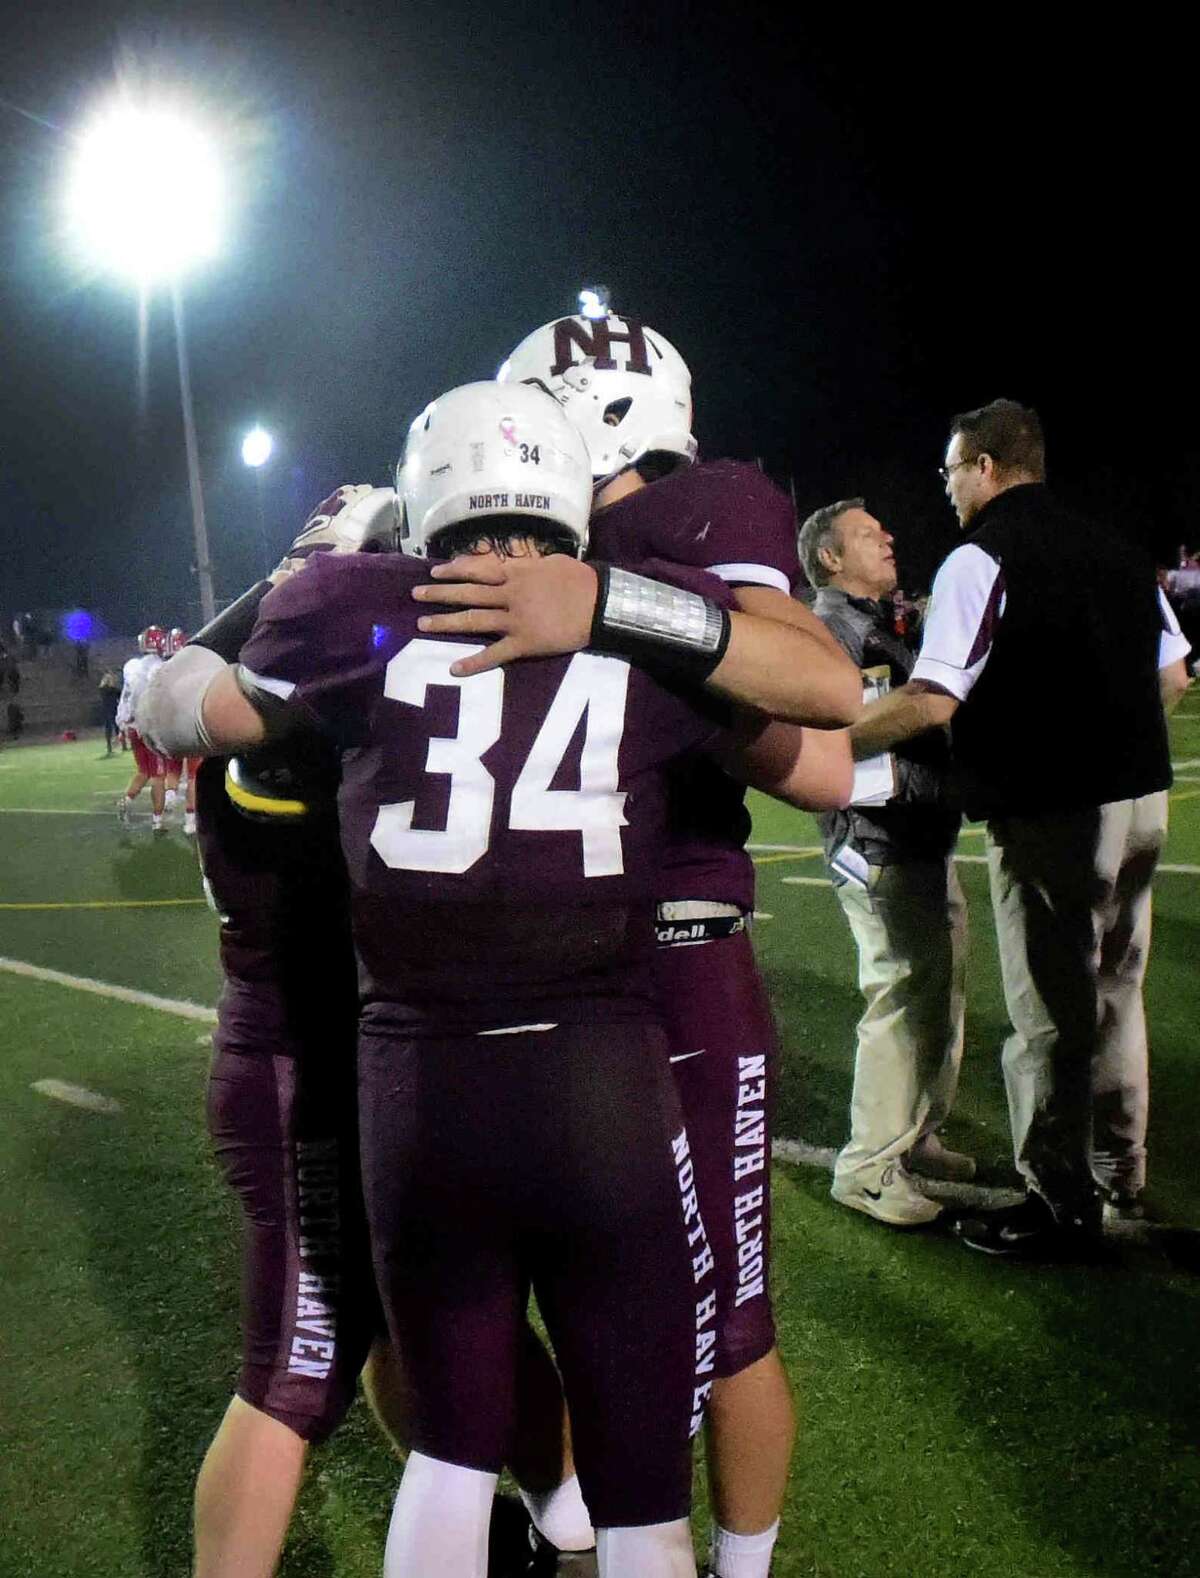 North Haven’s Conner Suraci gets a hug from his teammates after North Haven’s Class L championship loss to New Canaan. NH coach Tony Sagnella and New Canaan coach Lou Marinelli meet in the background. (Peter Hvizdak – New Haven Register)